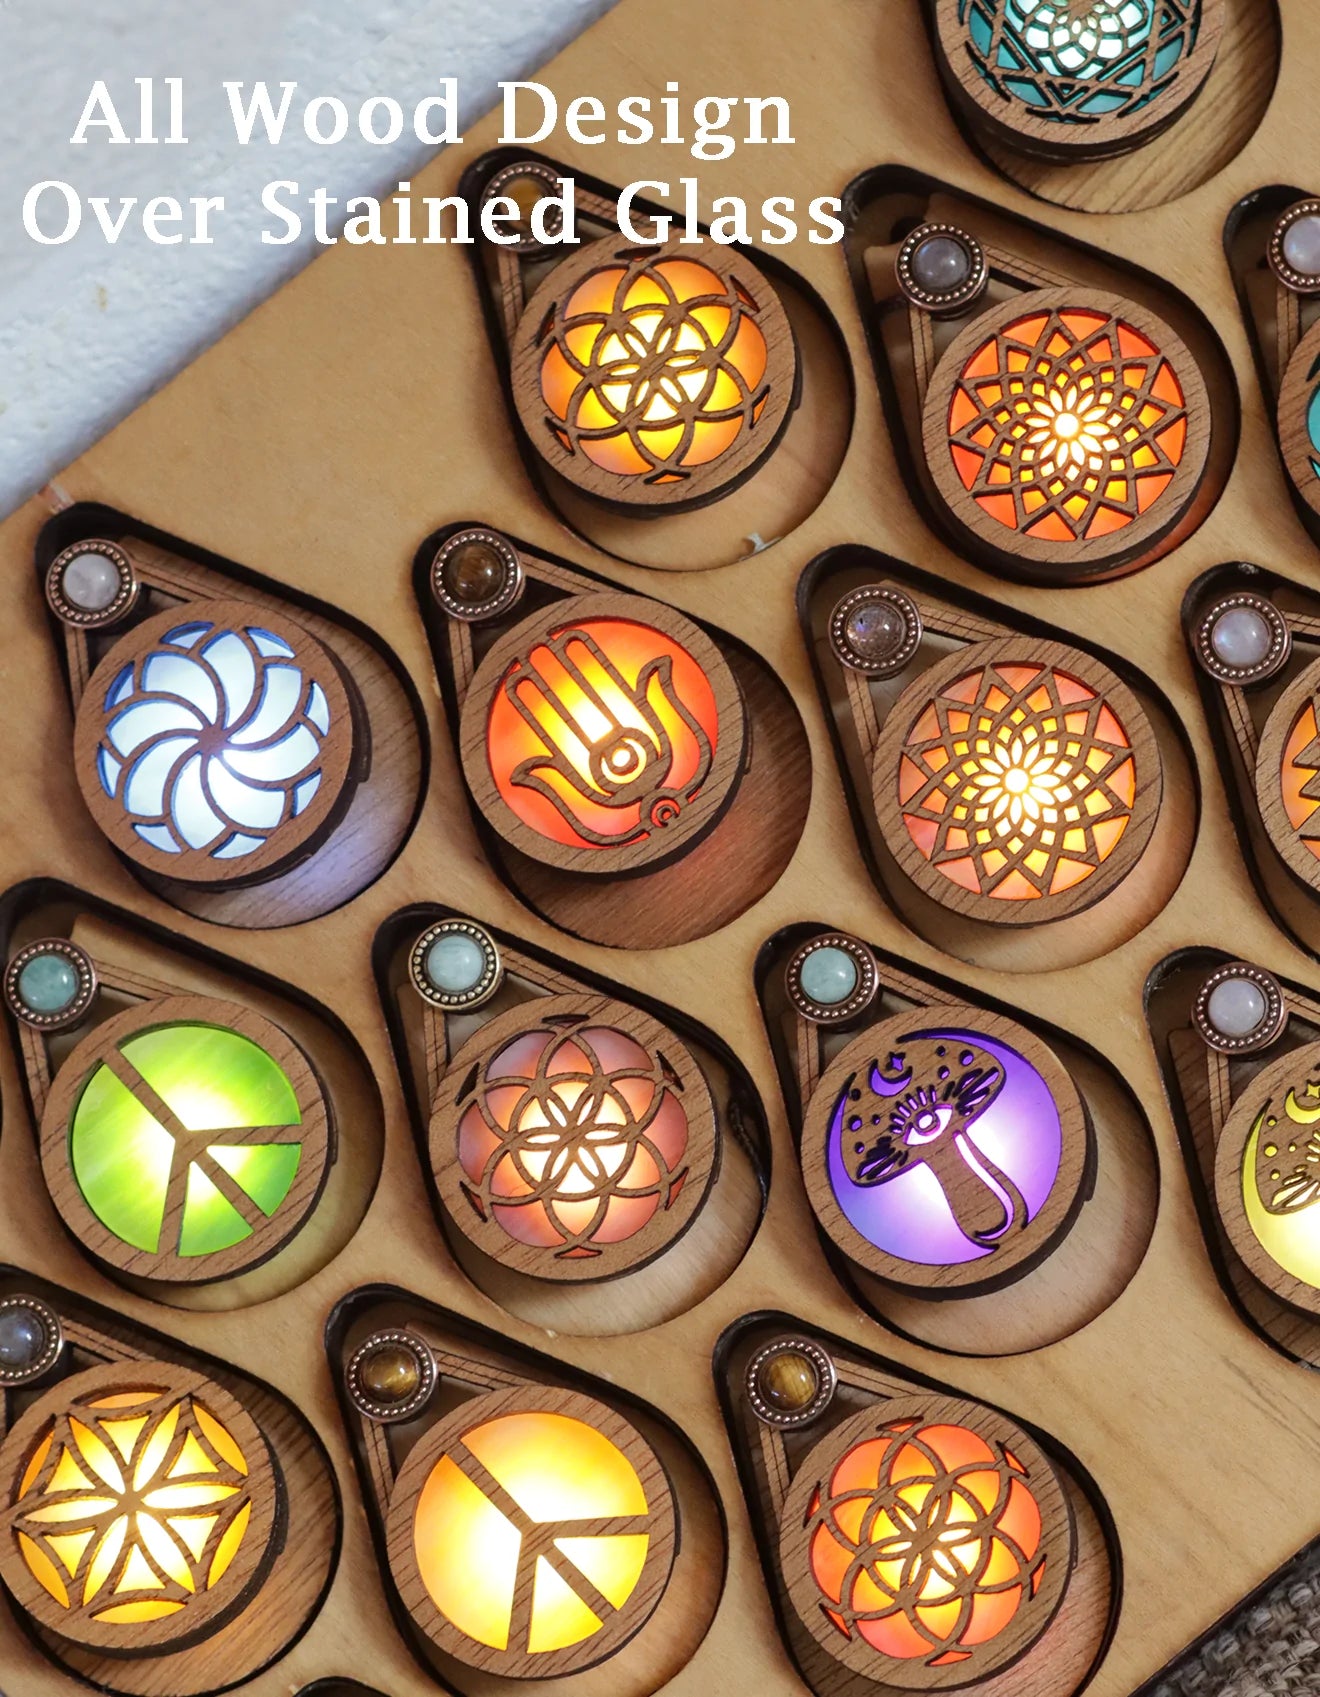 Glowing Iridescent Stained Glass Wooden LED Pendant | Merkaba